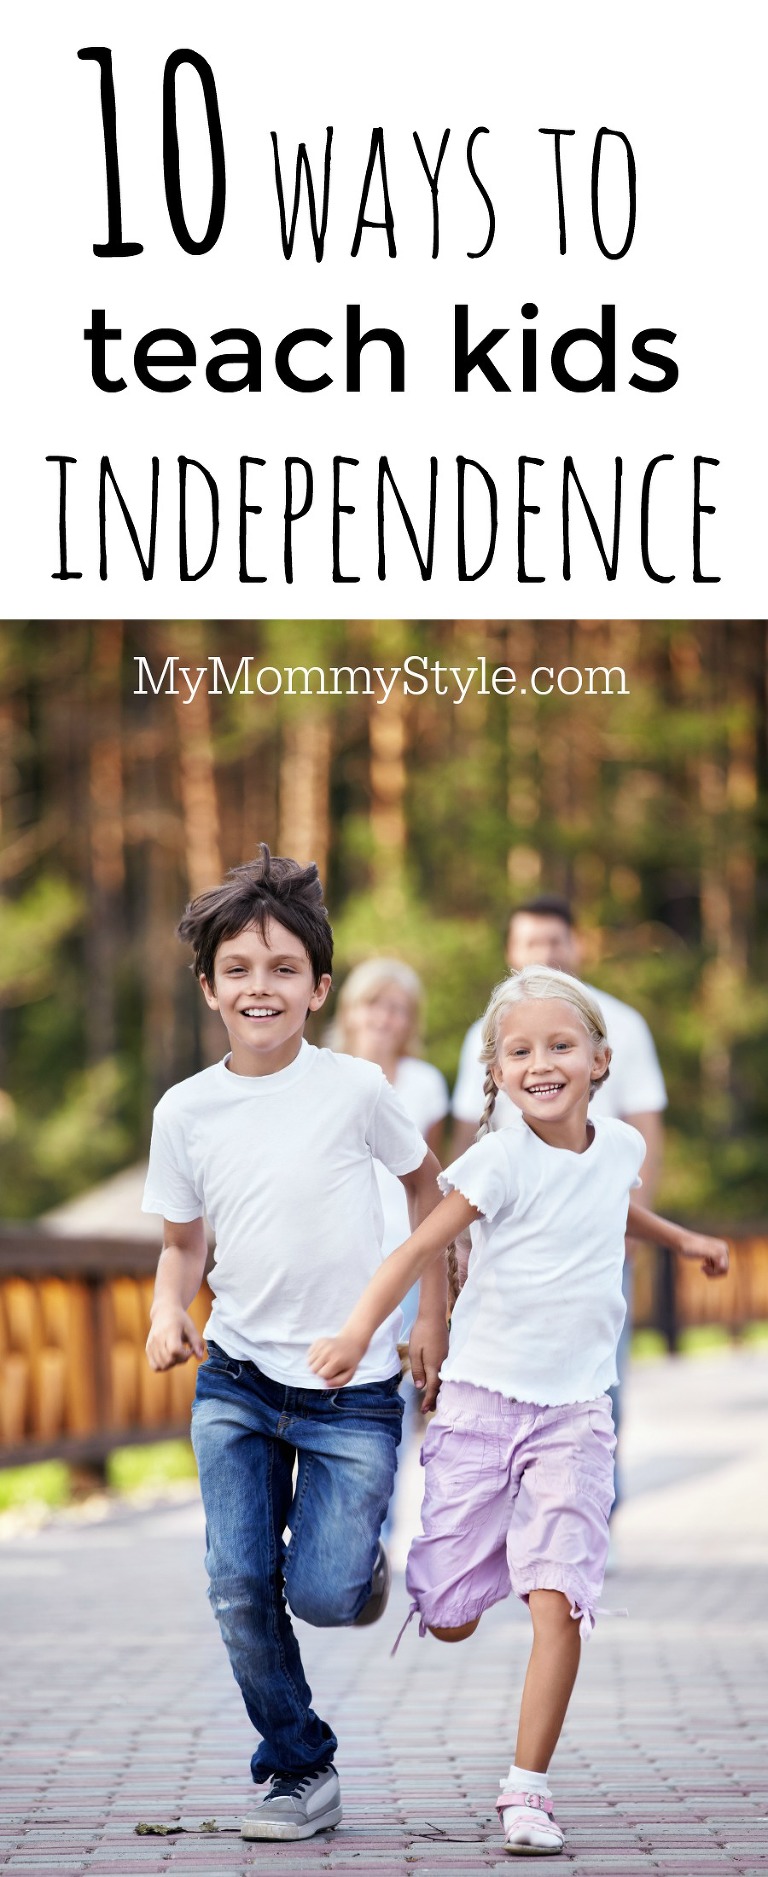 Great ideas to teach your children how to be independent at an early age so they are prepared for life on their own later.